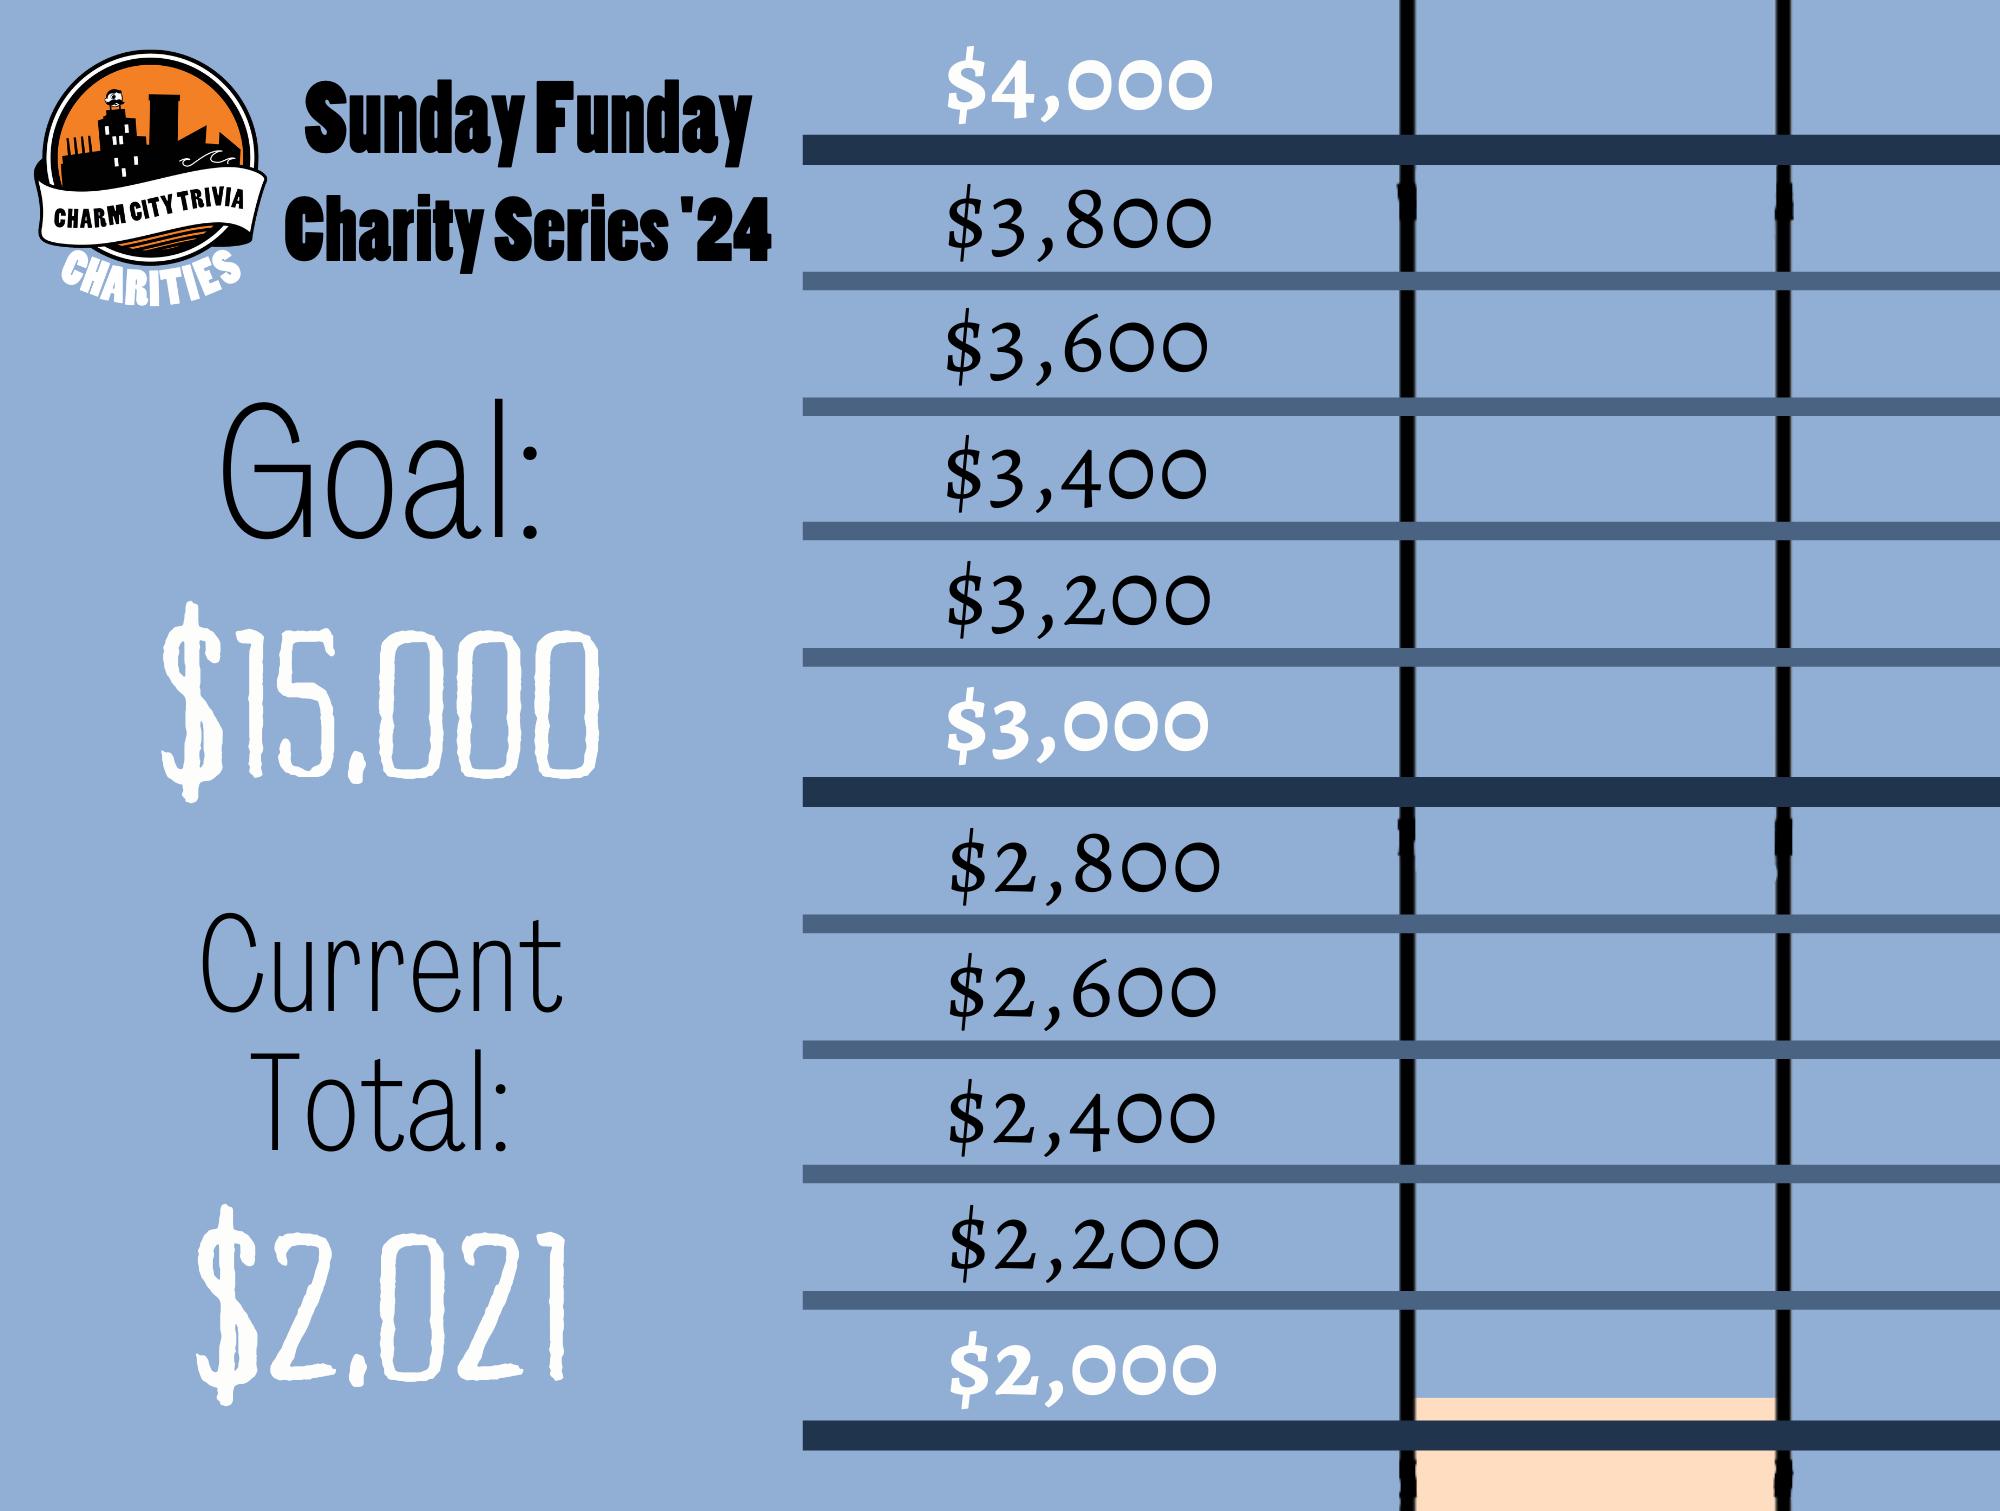 a light blue background with a section of the thermometer, blue lines separating the thermometer into donation milestones from $2,000 to $4,000, the Charm City Trivia Charities logo, a very light orange bar inside the thermometer that goes from the bottom of the image to just above the line that reads $2,000, and black and white text. The text reads: Sunday Funday Charity Series '24. Goal: $15,000. Current Total: $2,021